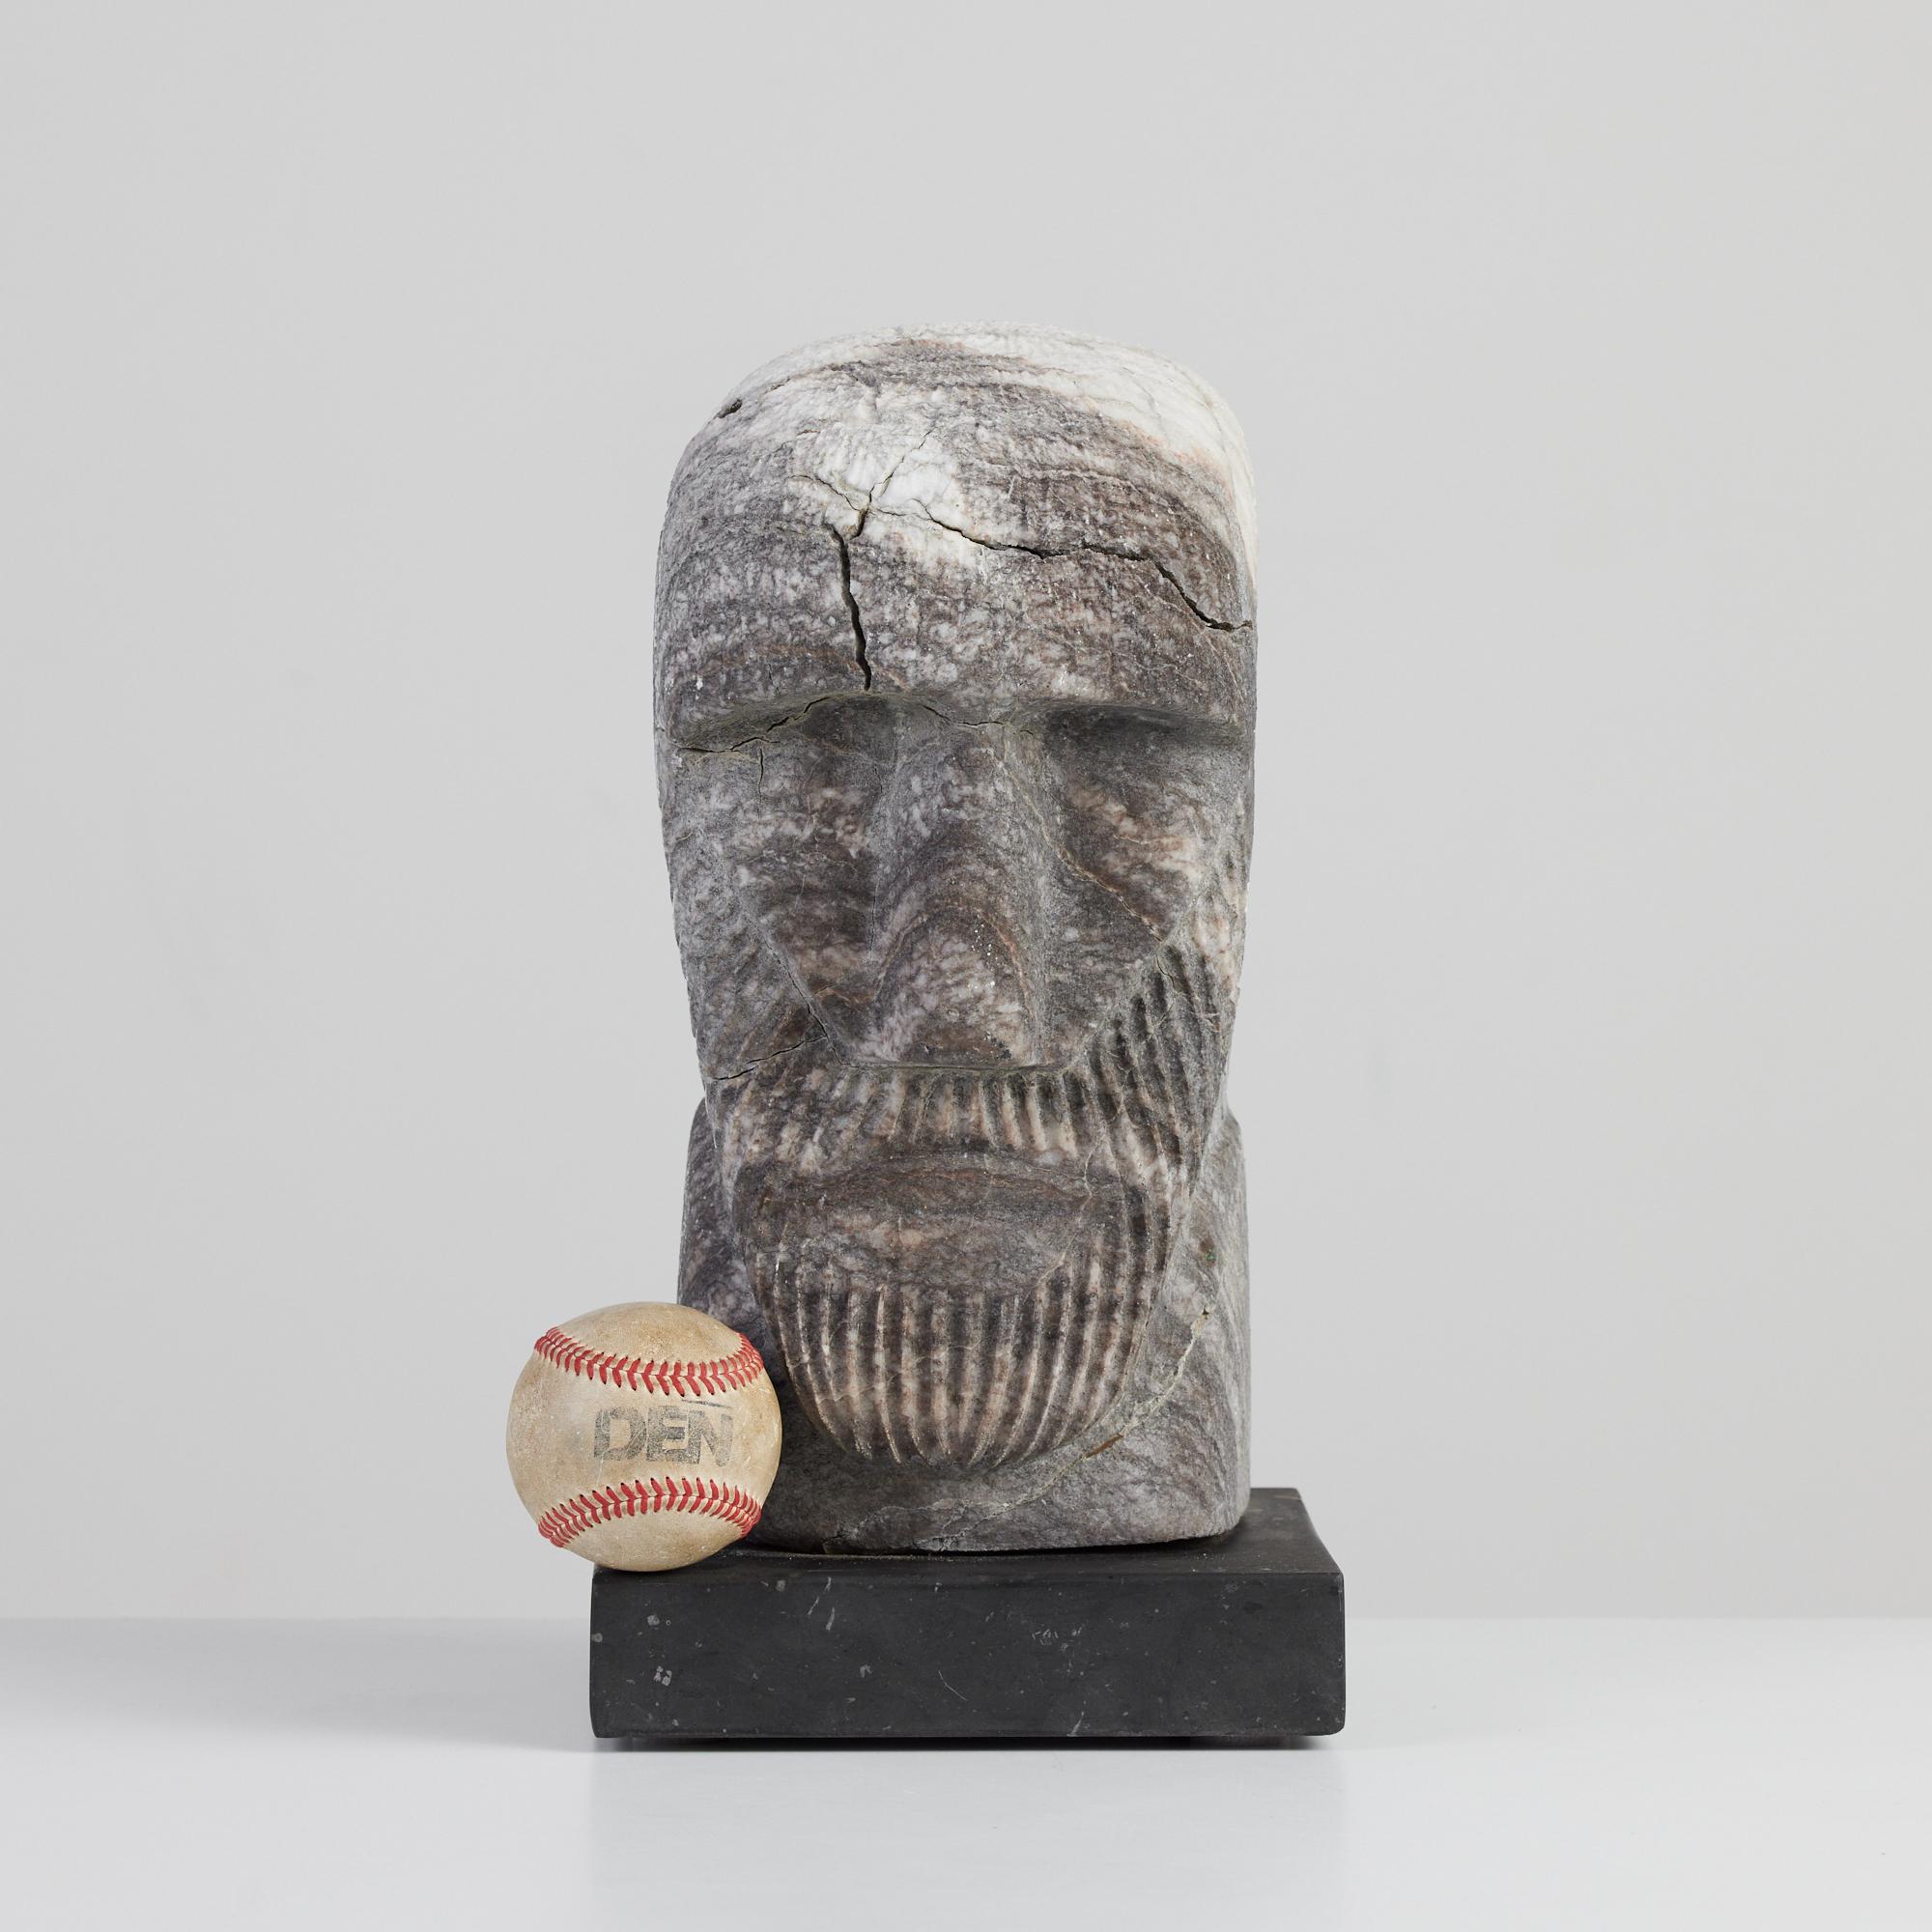 Raw marble figurative carved sculpture with gray and white marbling. This piece appears to be the head of a man with a strong brow, defined nose. and hand carved ribbing around the face to resemble a beard. The sculpture sits atop a polished black